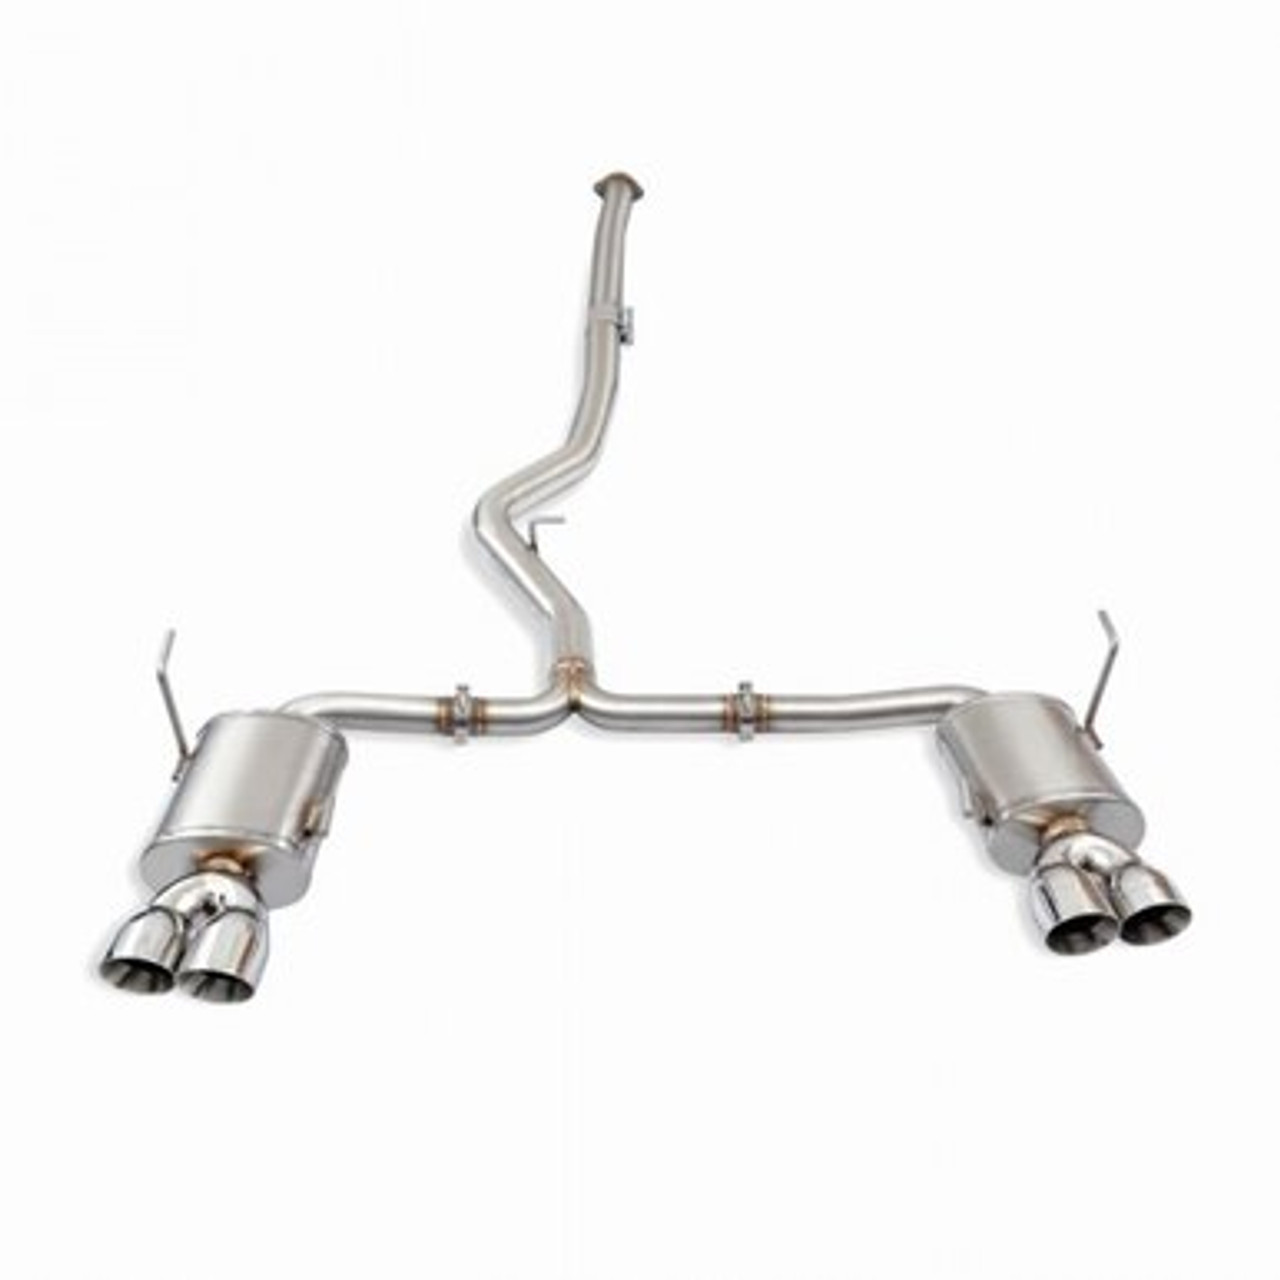 Mishimoto 2015+ WRX/ STI 3in Stainless Steel Cat-Back Exhaust